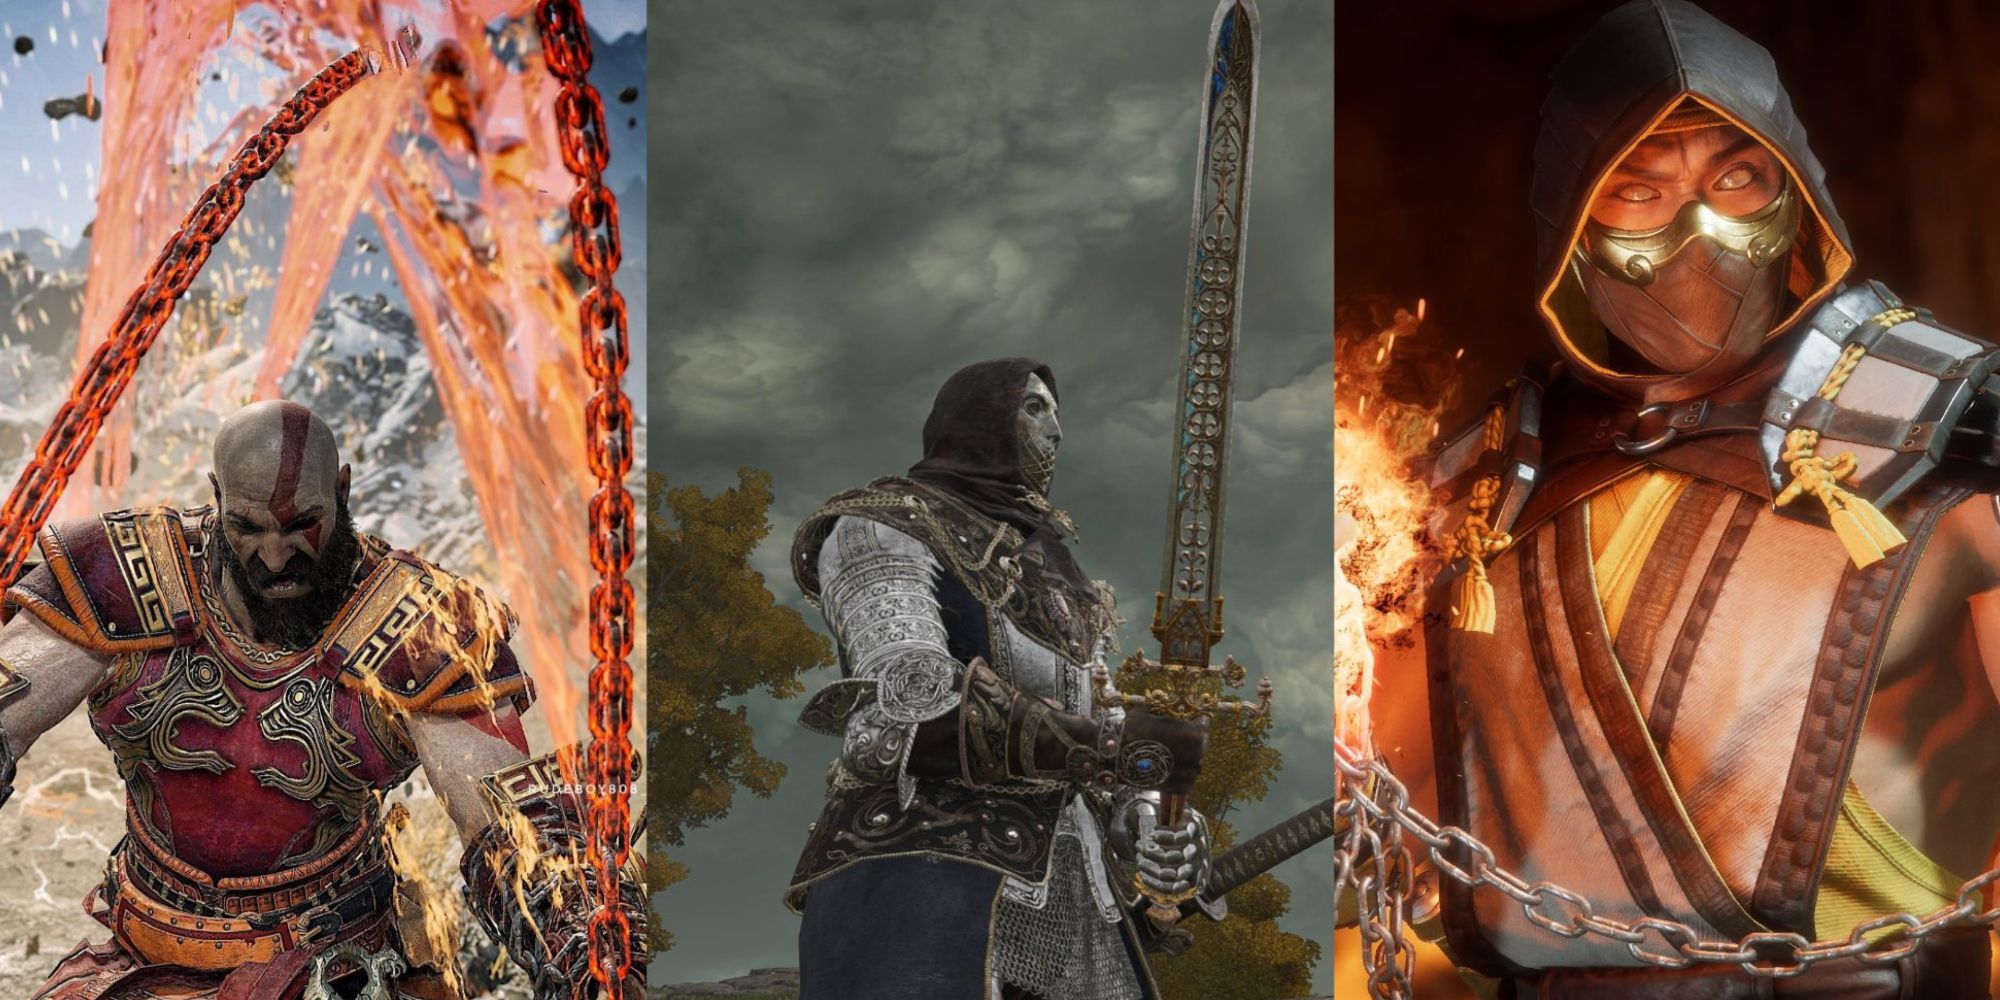 Kratos, the Tarnished, and Scorpion wielding fire weapons